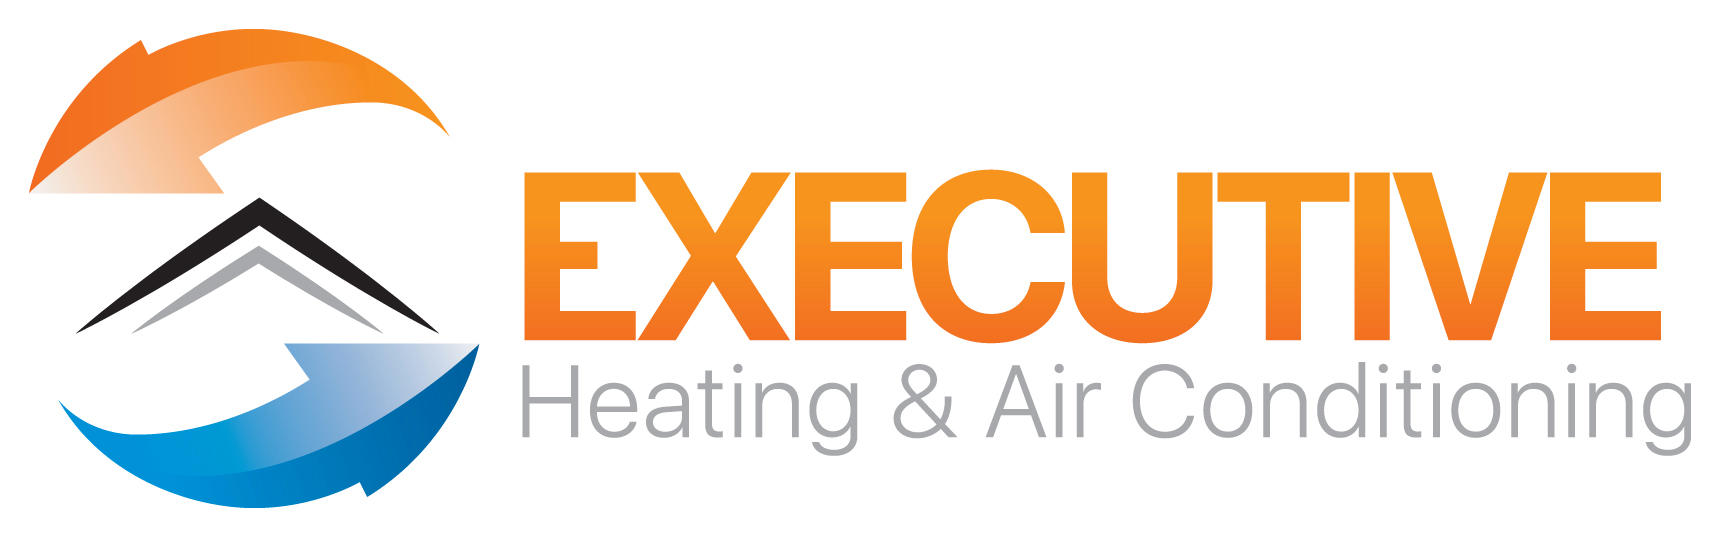 Executive Heating & Air Conditioning Photo